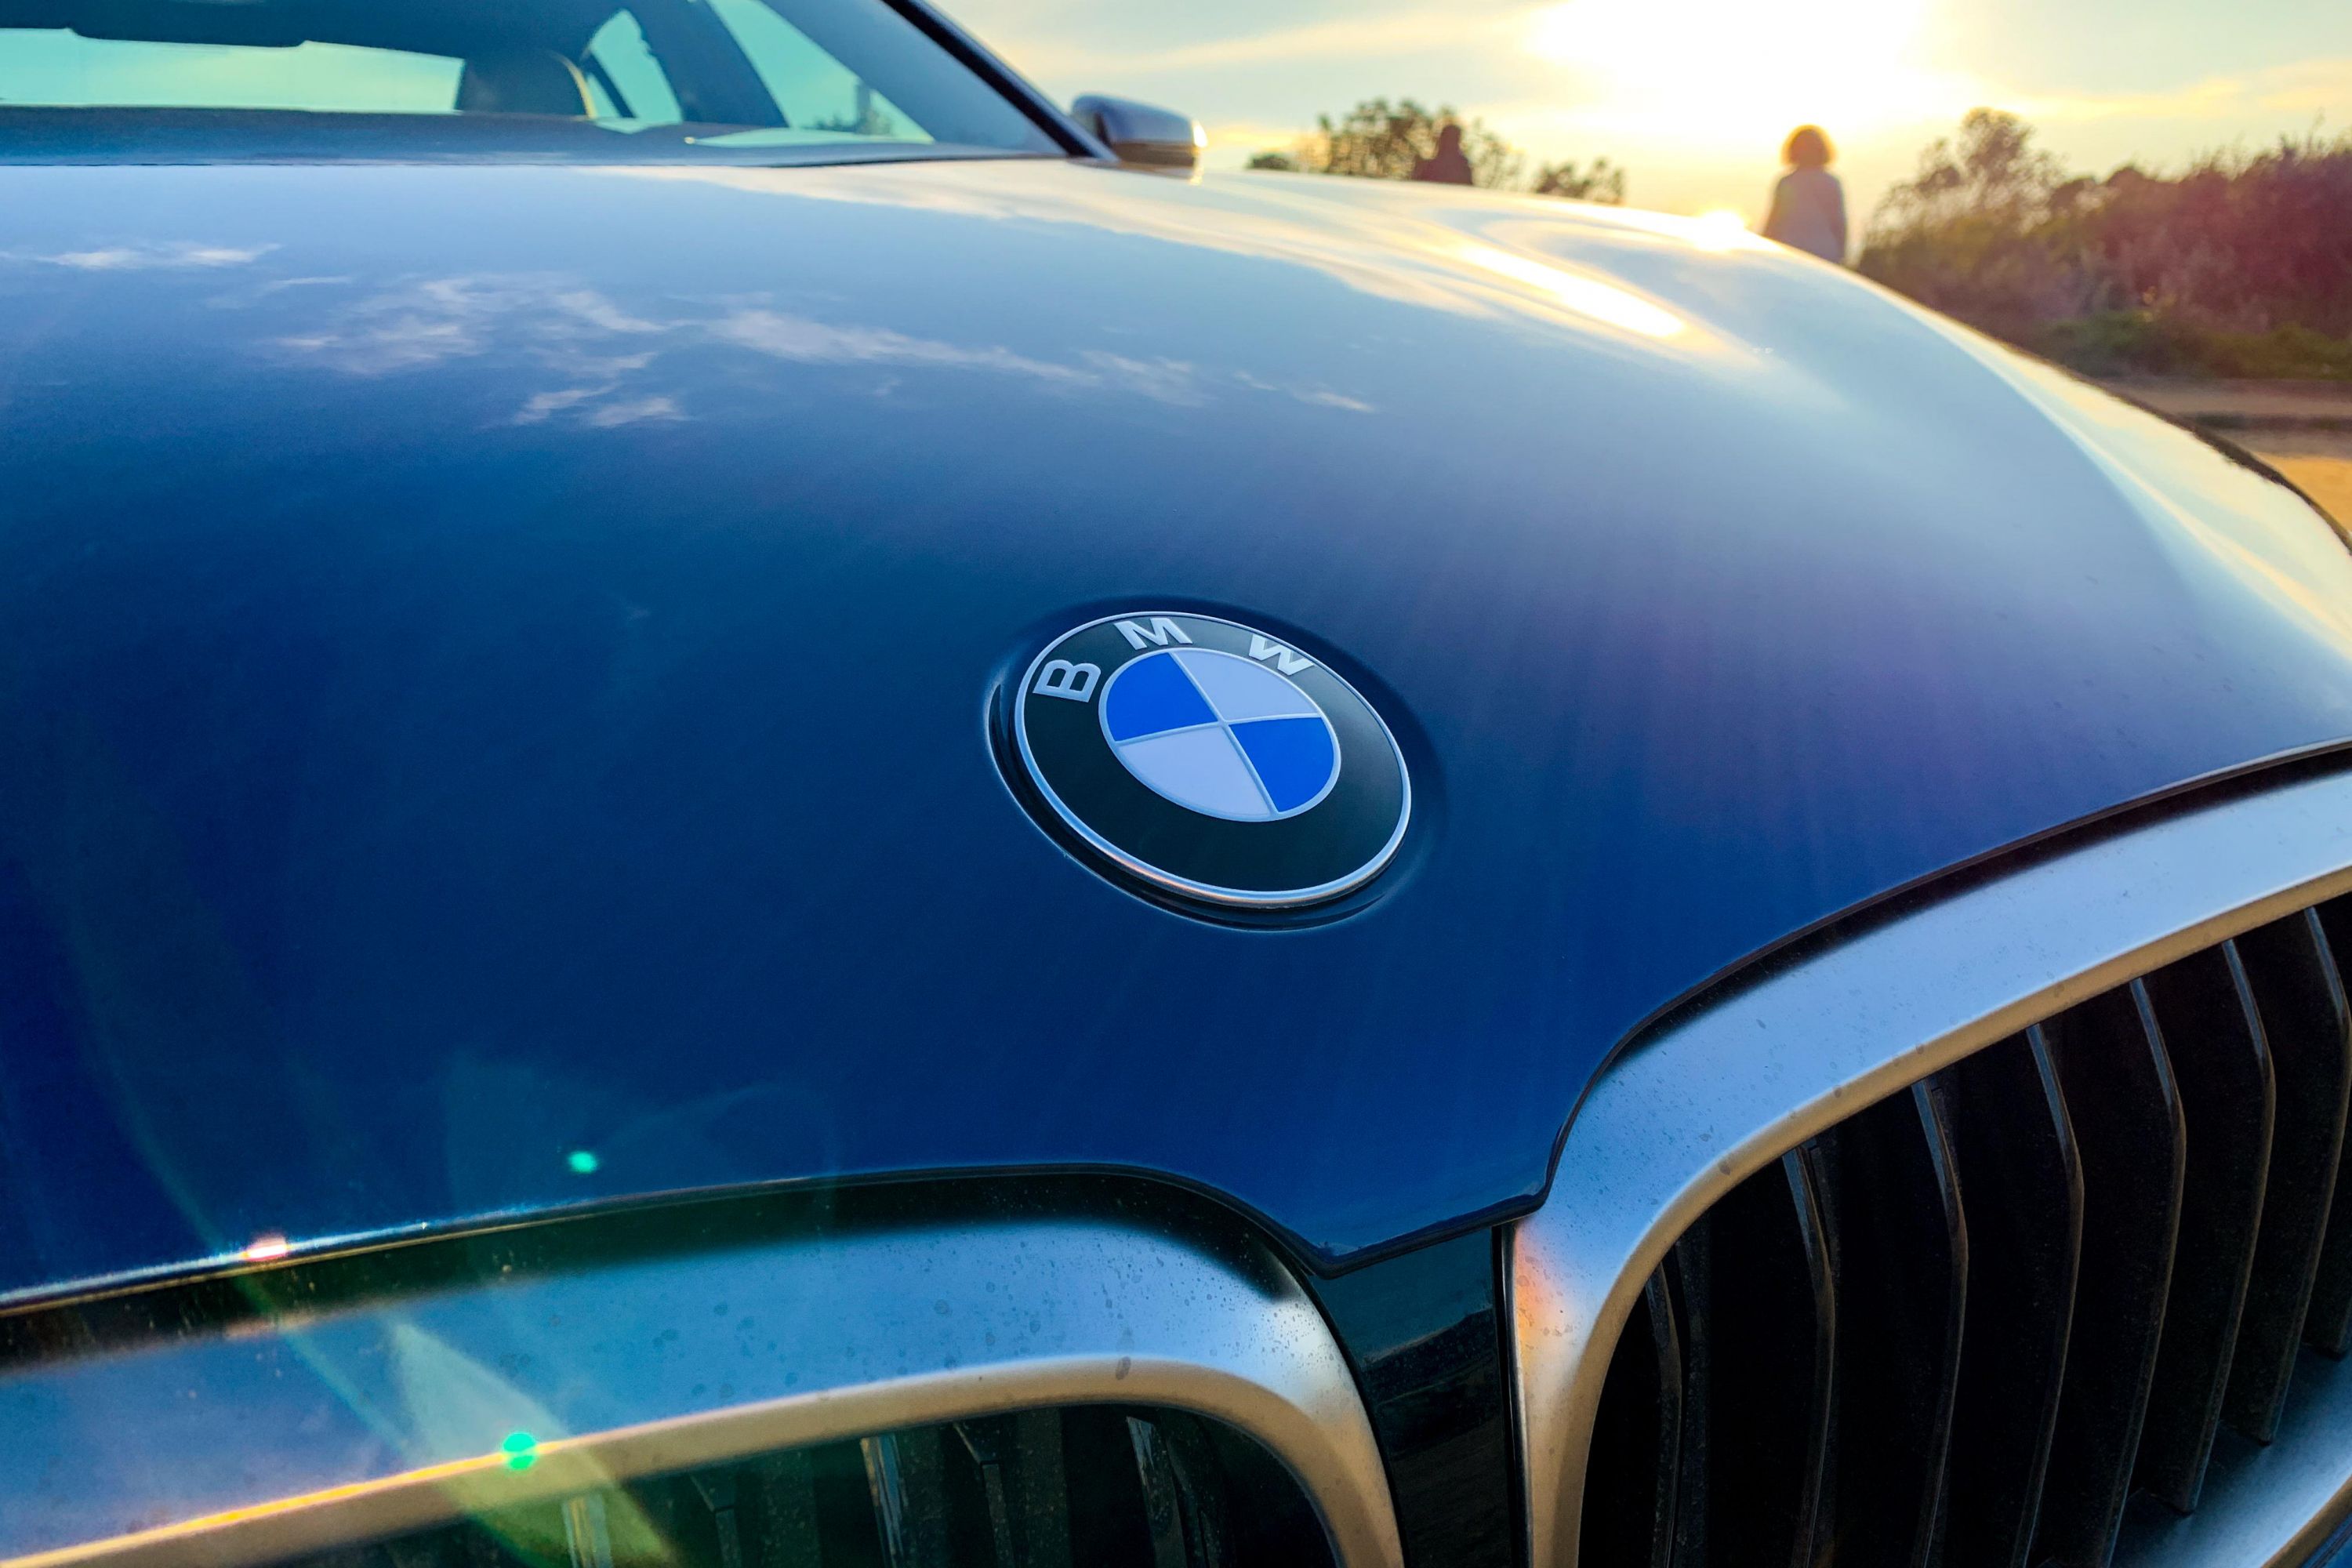 BMW logo and some history behind the car